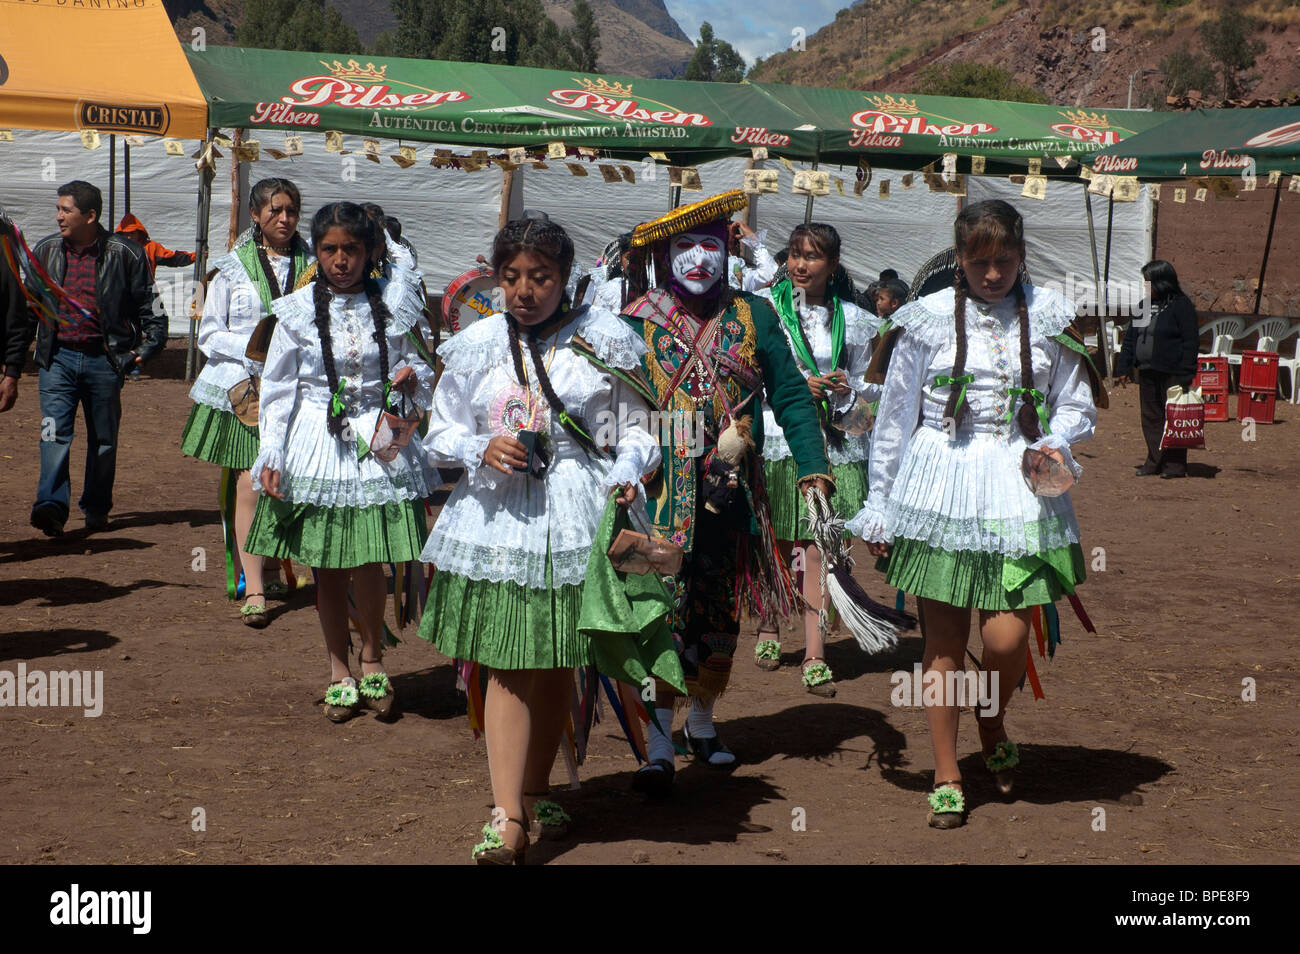 A womens dancing group leaves the arena after competing in the Virgin Carmel Festival, Pisac, Sacred Valley, Peru. Stock Photo